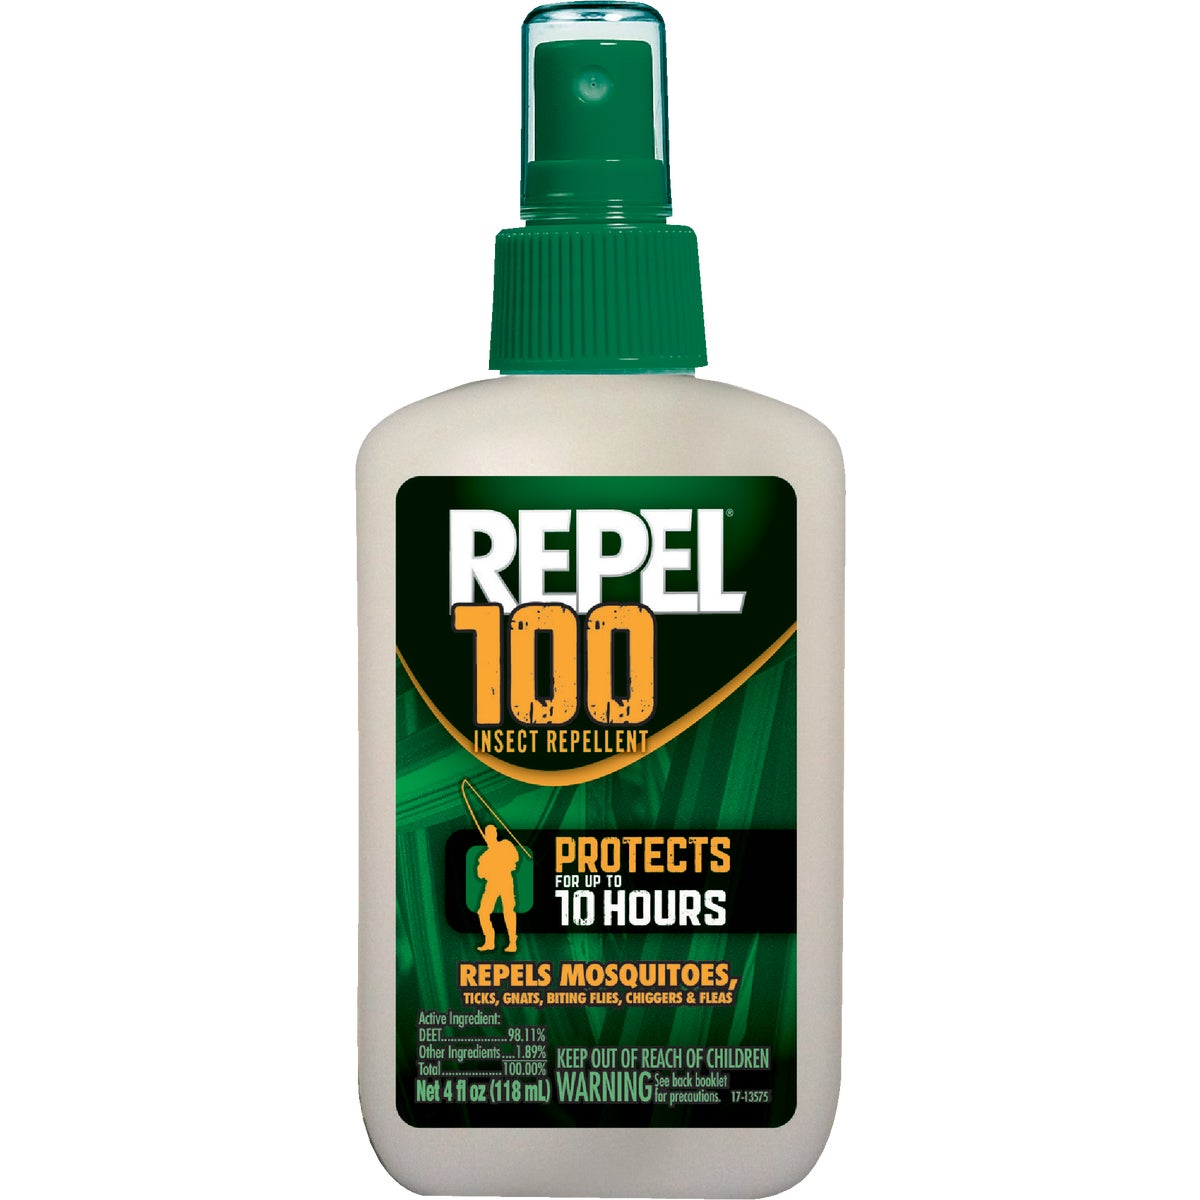 Item 704131, Repel 100 provides complete protection from mosquitoes, ticks, gnats, 